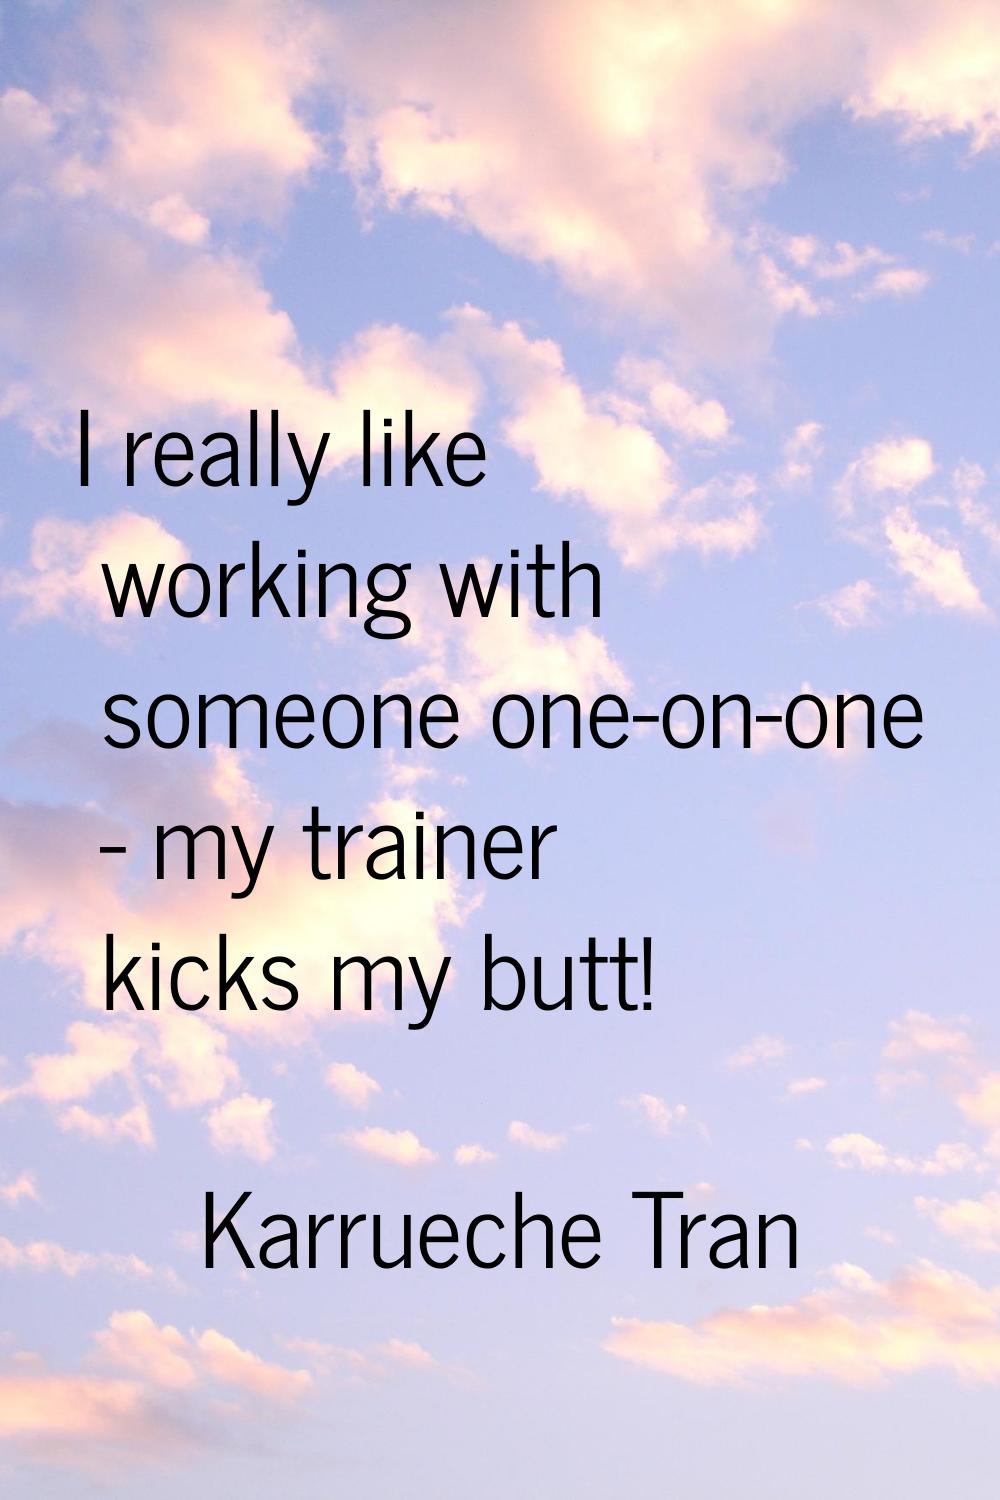 I really like working with someone one-on-one - my trainer kicks my butt!